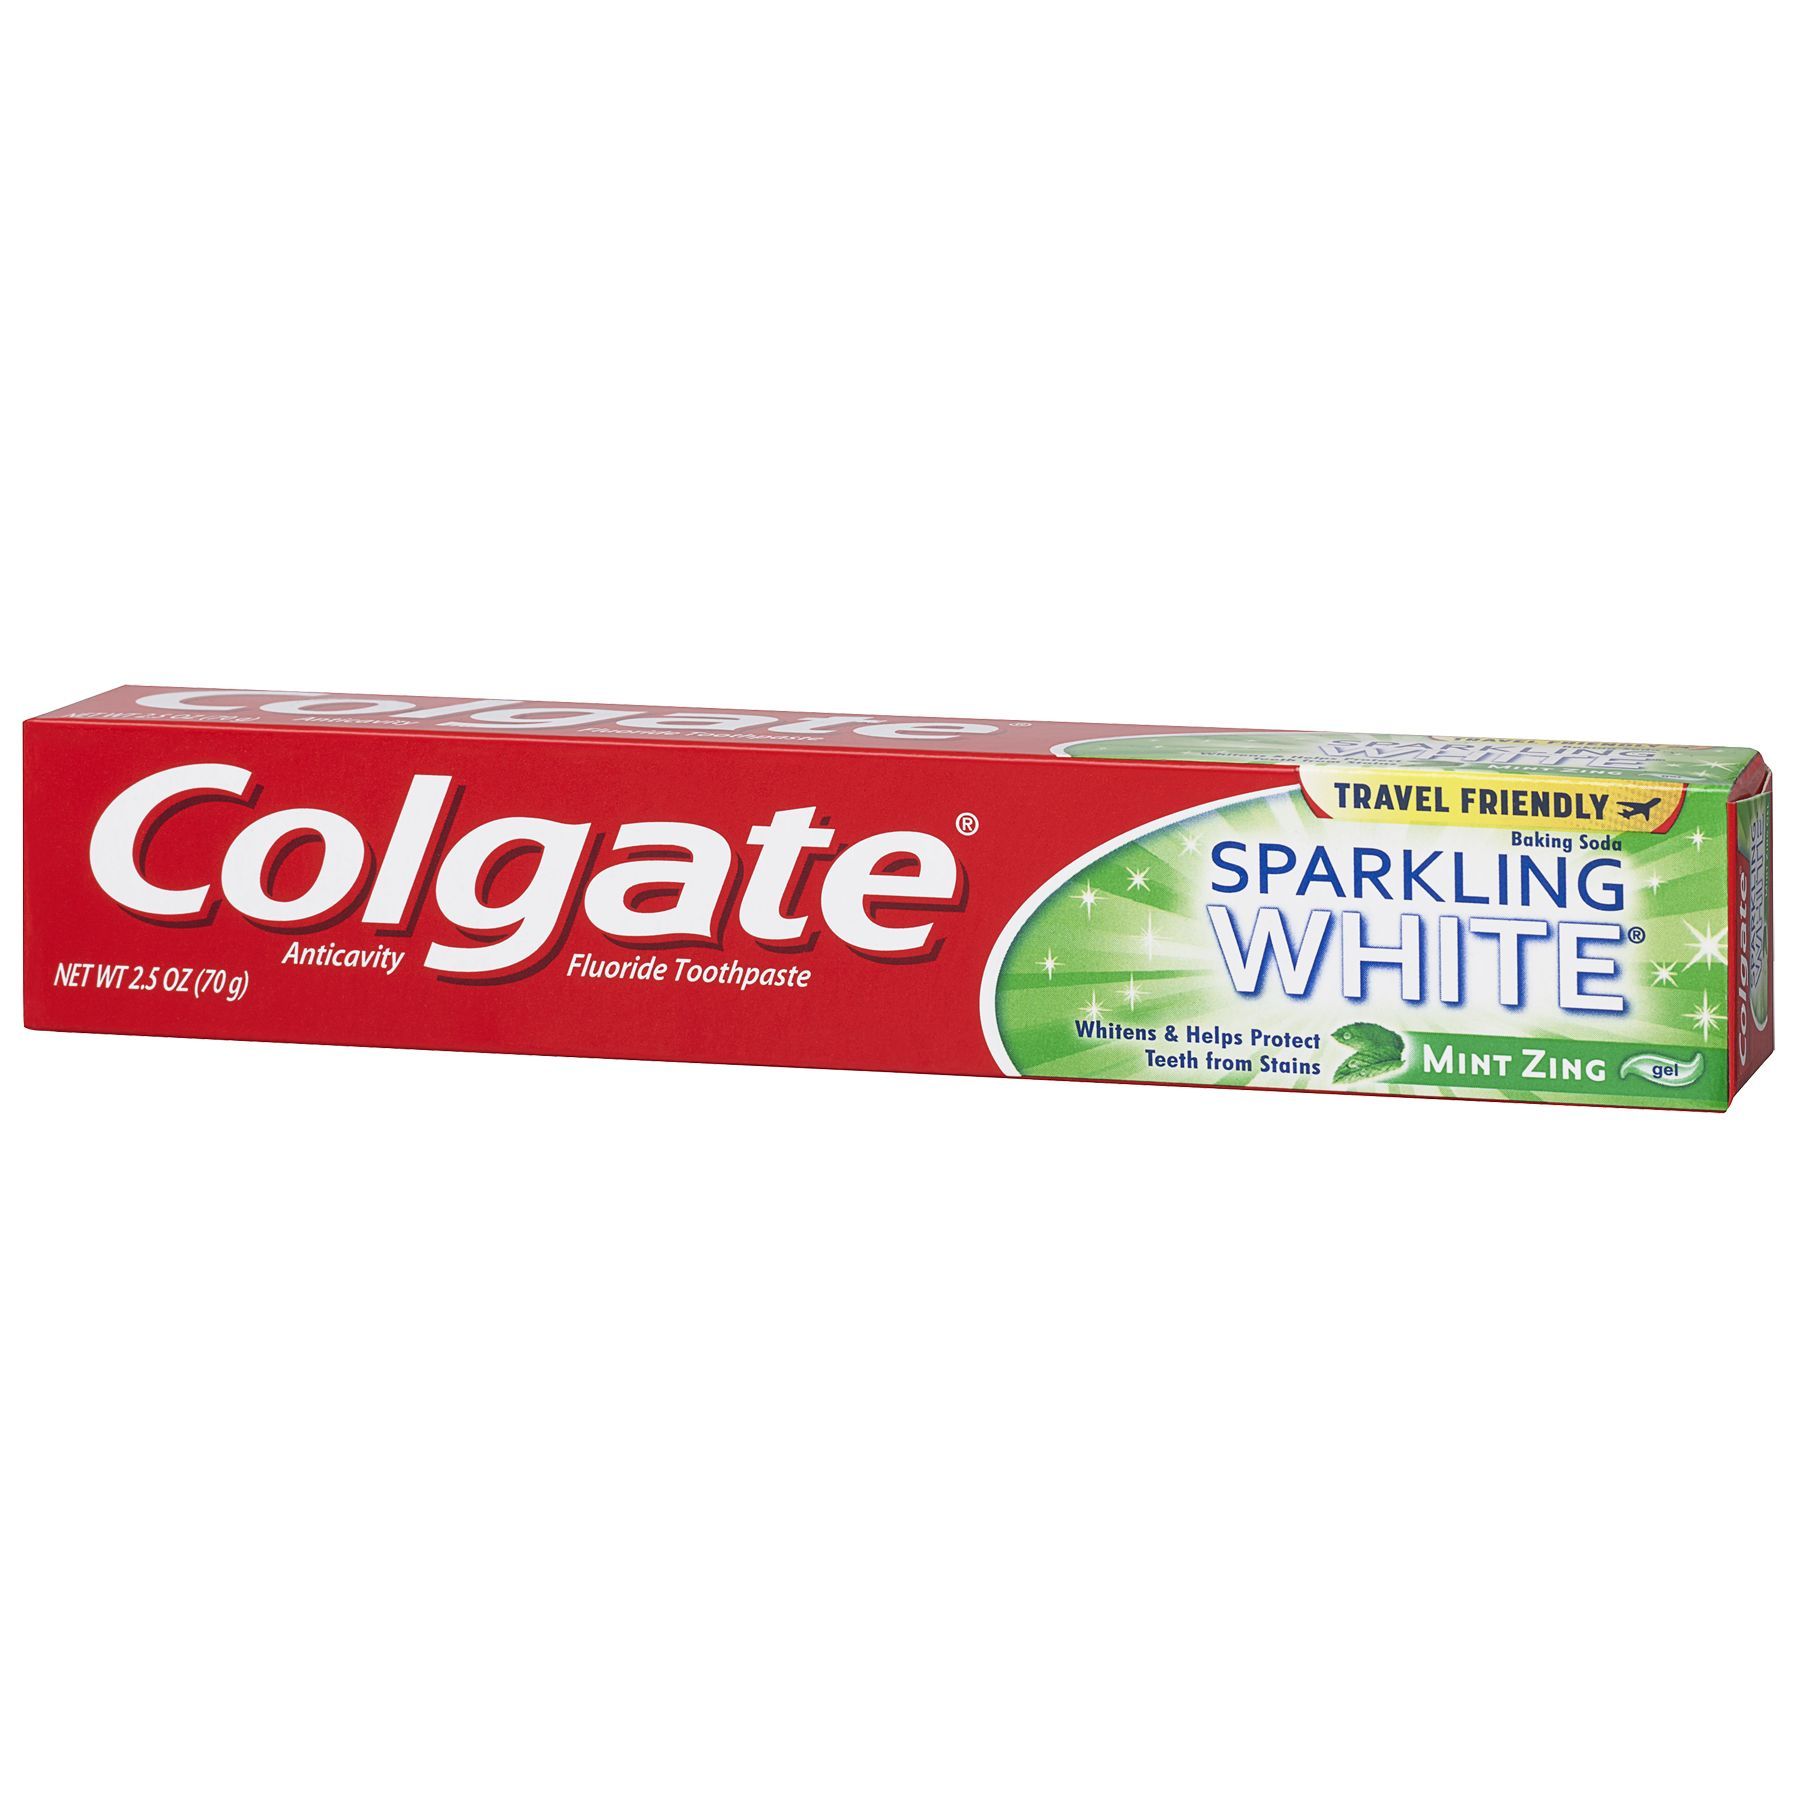 Product Illustration of Colgate Toothpaste 2.5oz mint zing sparkling 